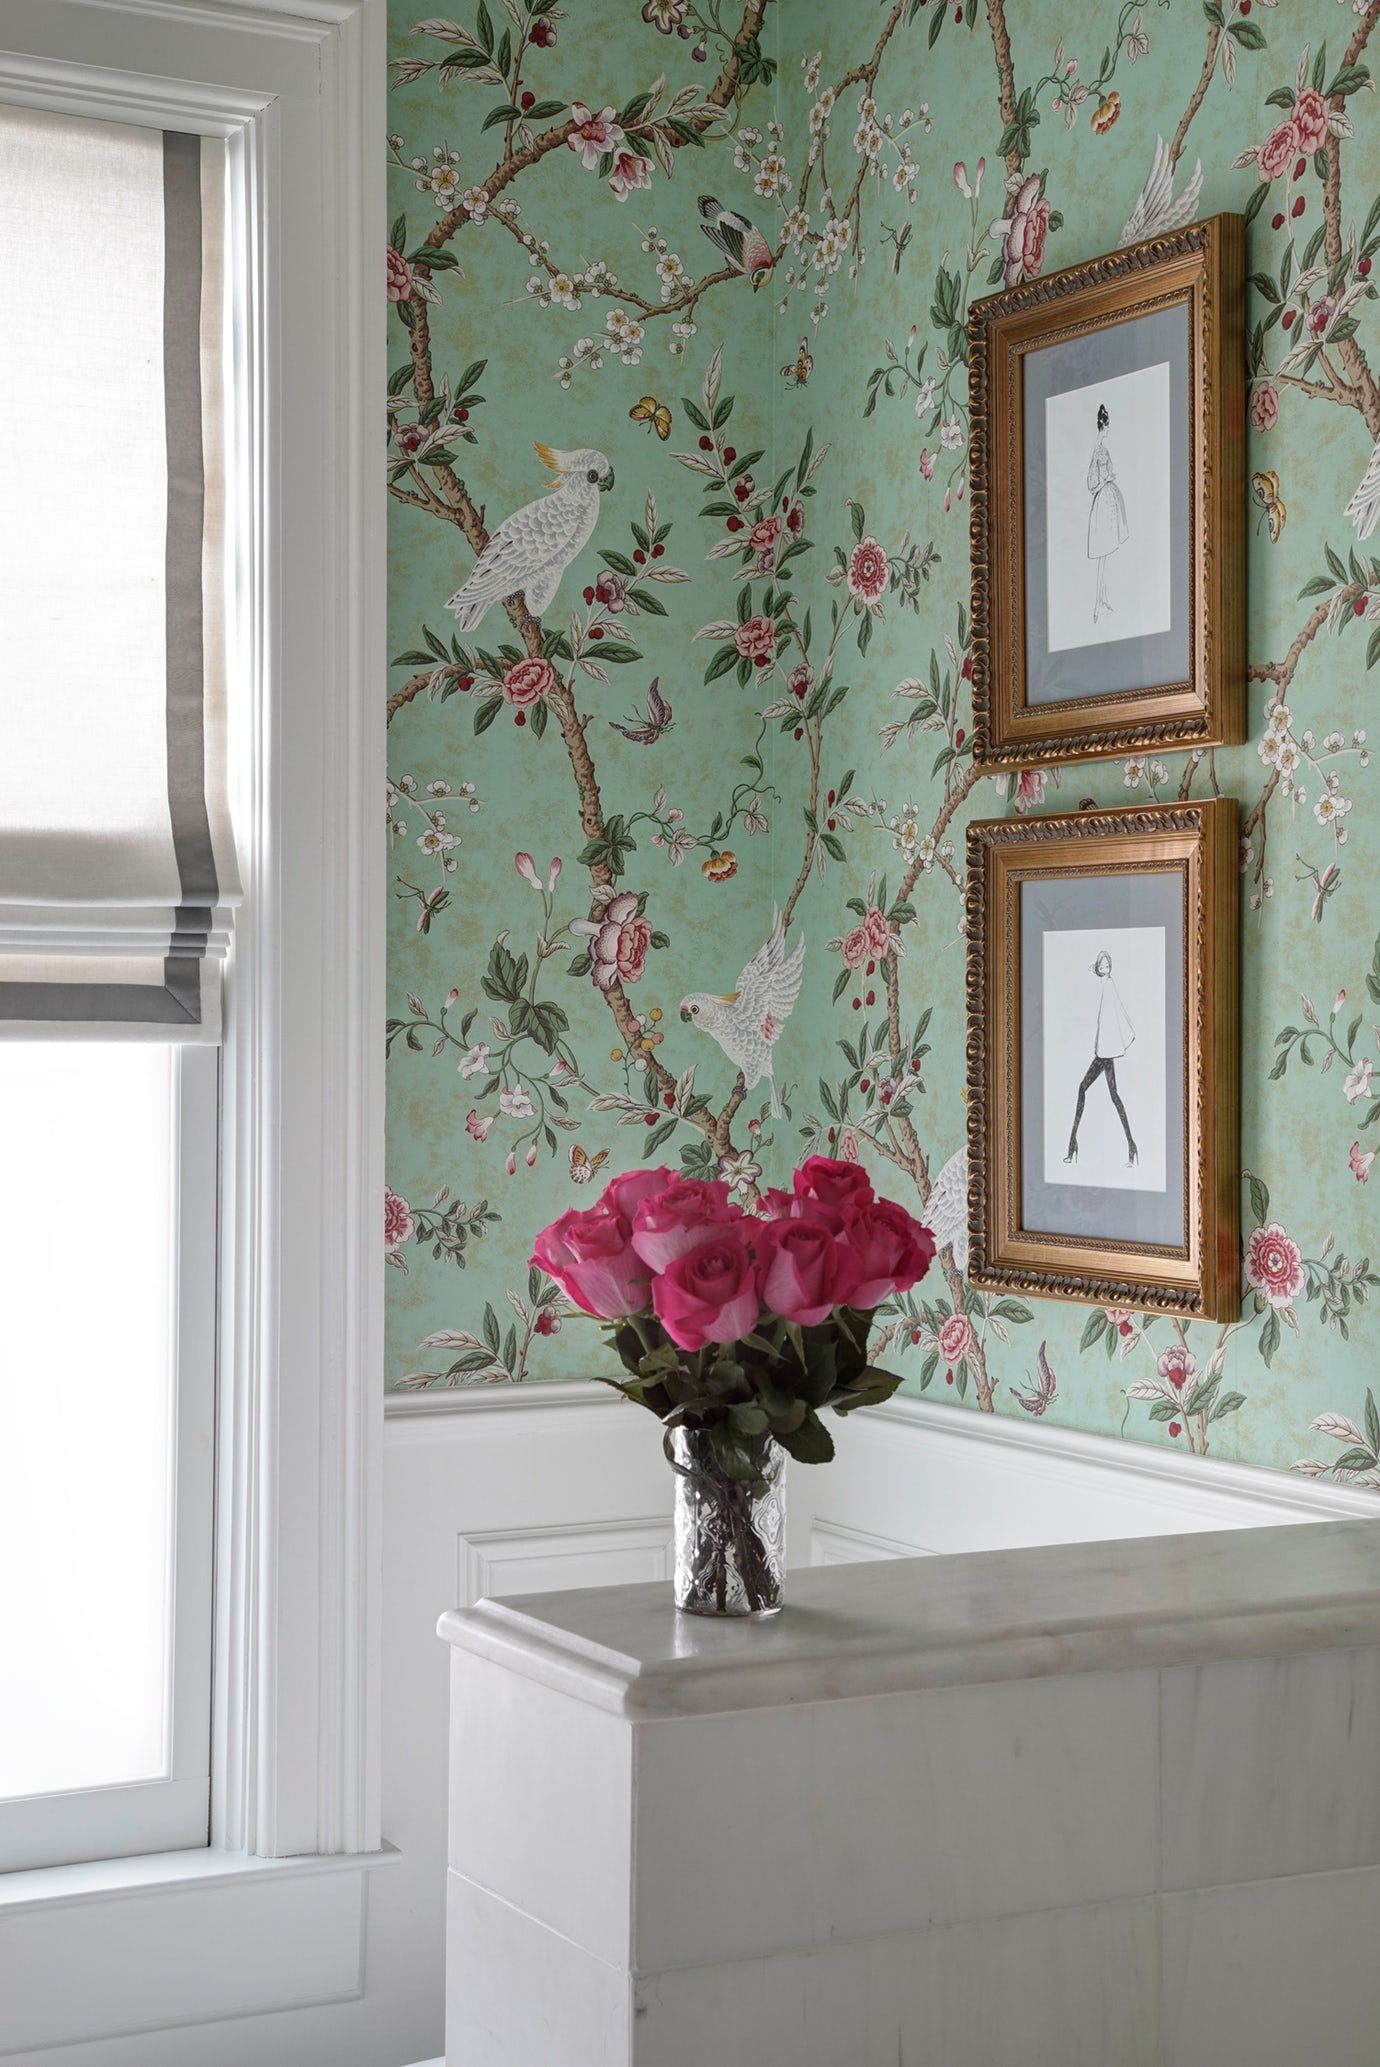 Chicago Eclectic Victorian Girls Bathroom With Chinoiserie